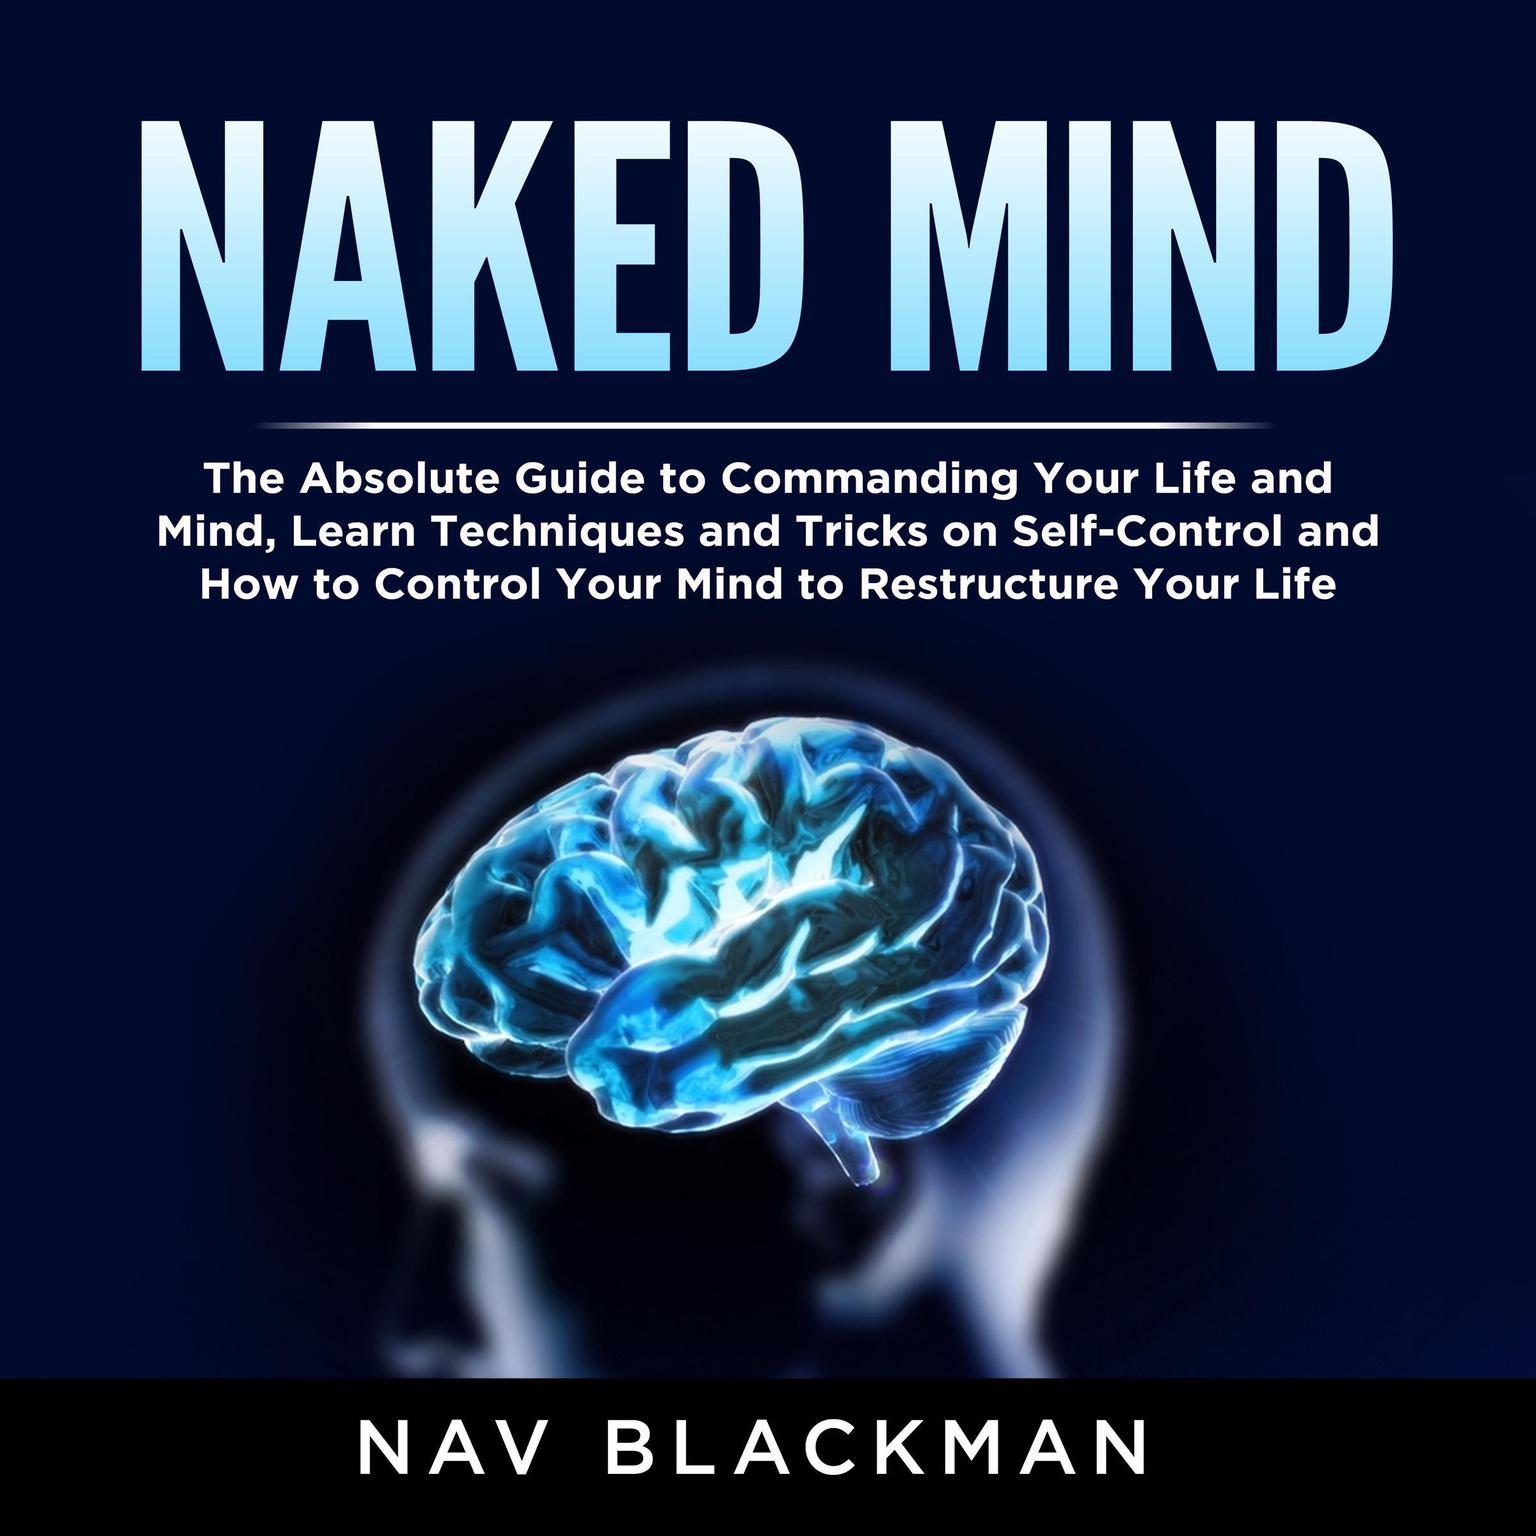 Naked Mind: The Absolute Guide to Commanding Your Life and Mind, Learn Techniques and Tricks on Self-Control and How to Control Your Mind to Restructure Your Life Audiobook, by Nav Blackman